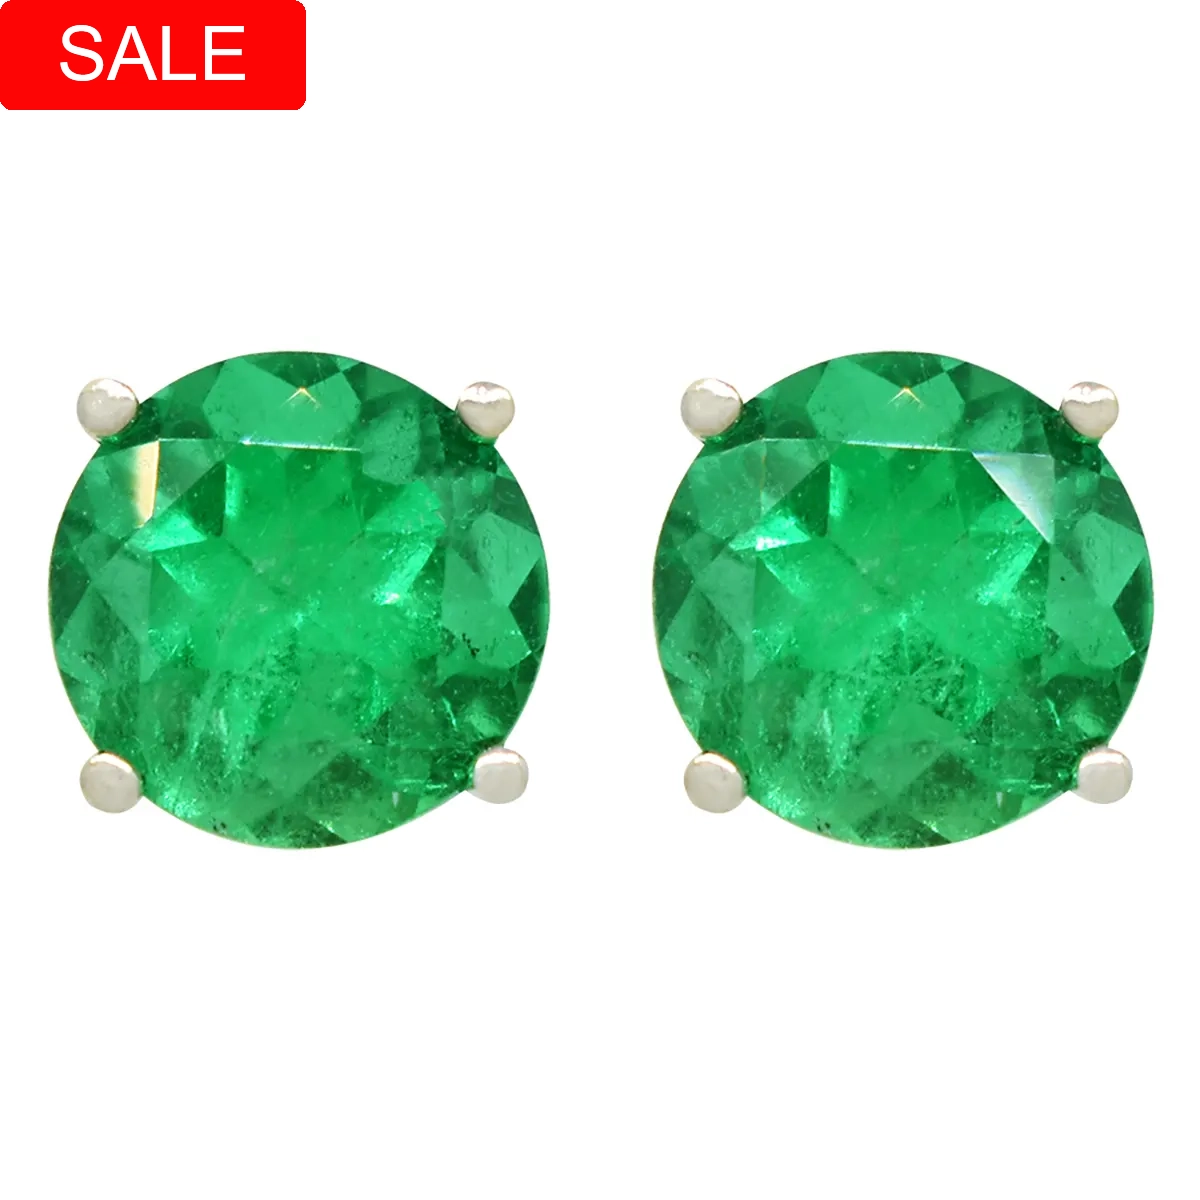 Large emerald stud earrings in 18K white gold with 2.78 Ct. t.w. in 2 genuine round cut natural Colombian emeralds with clear and brilliant green color